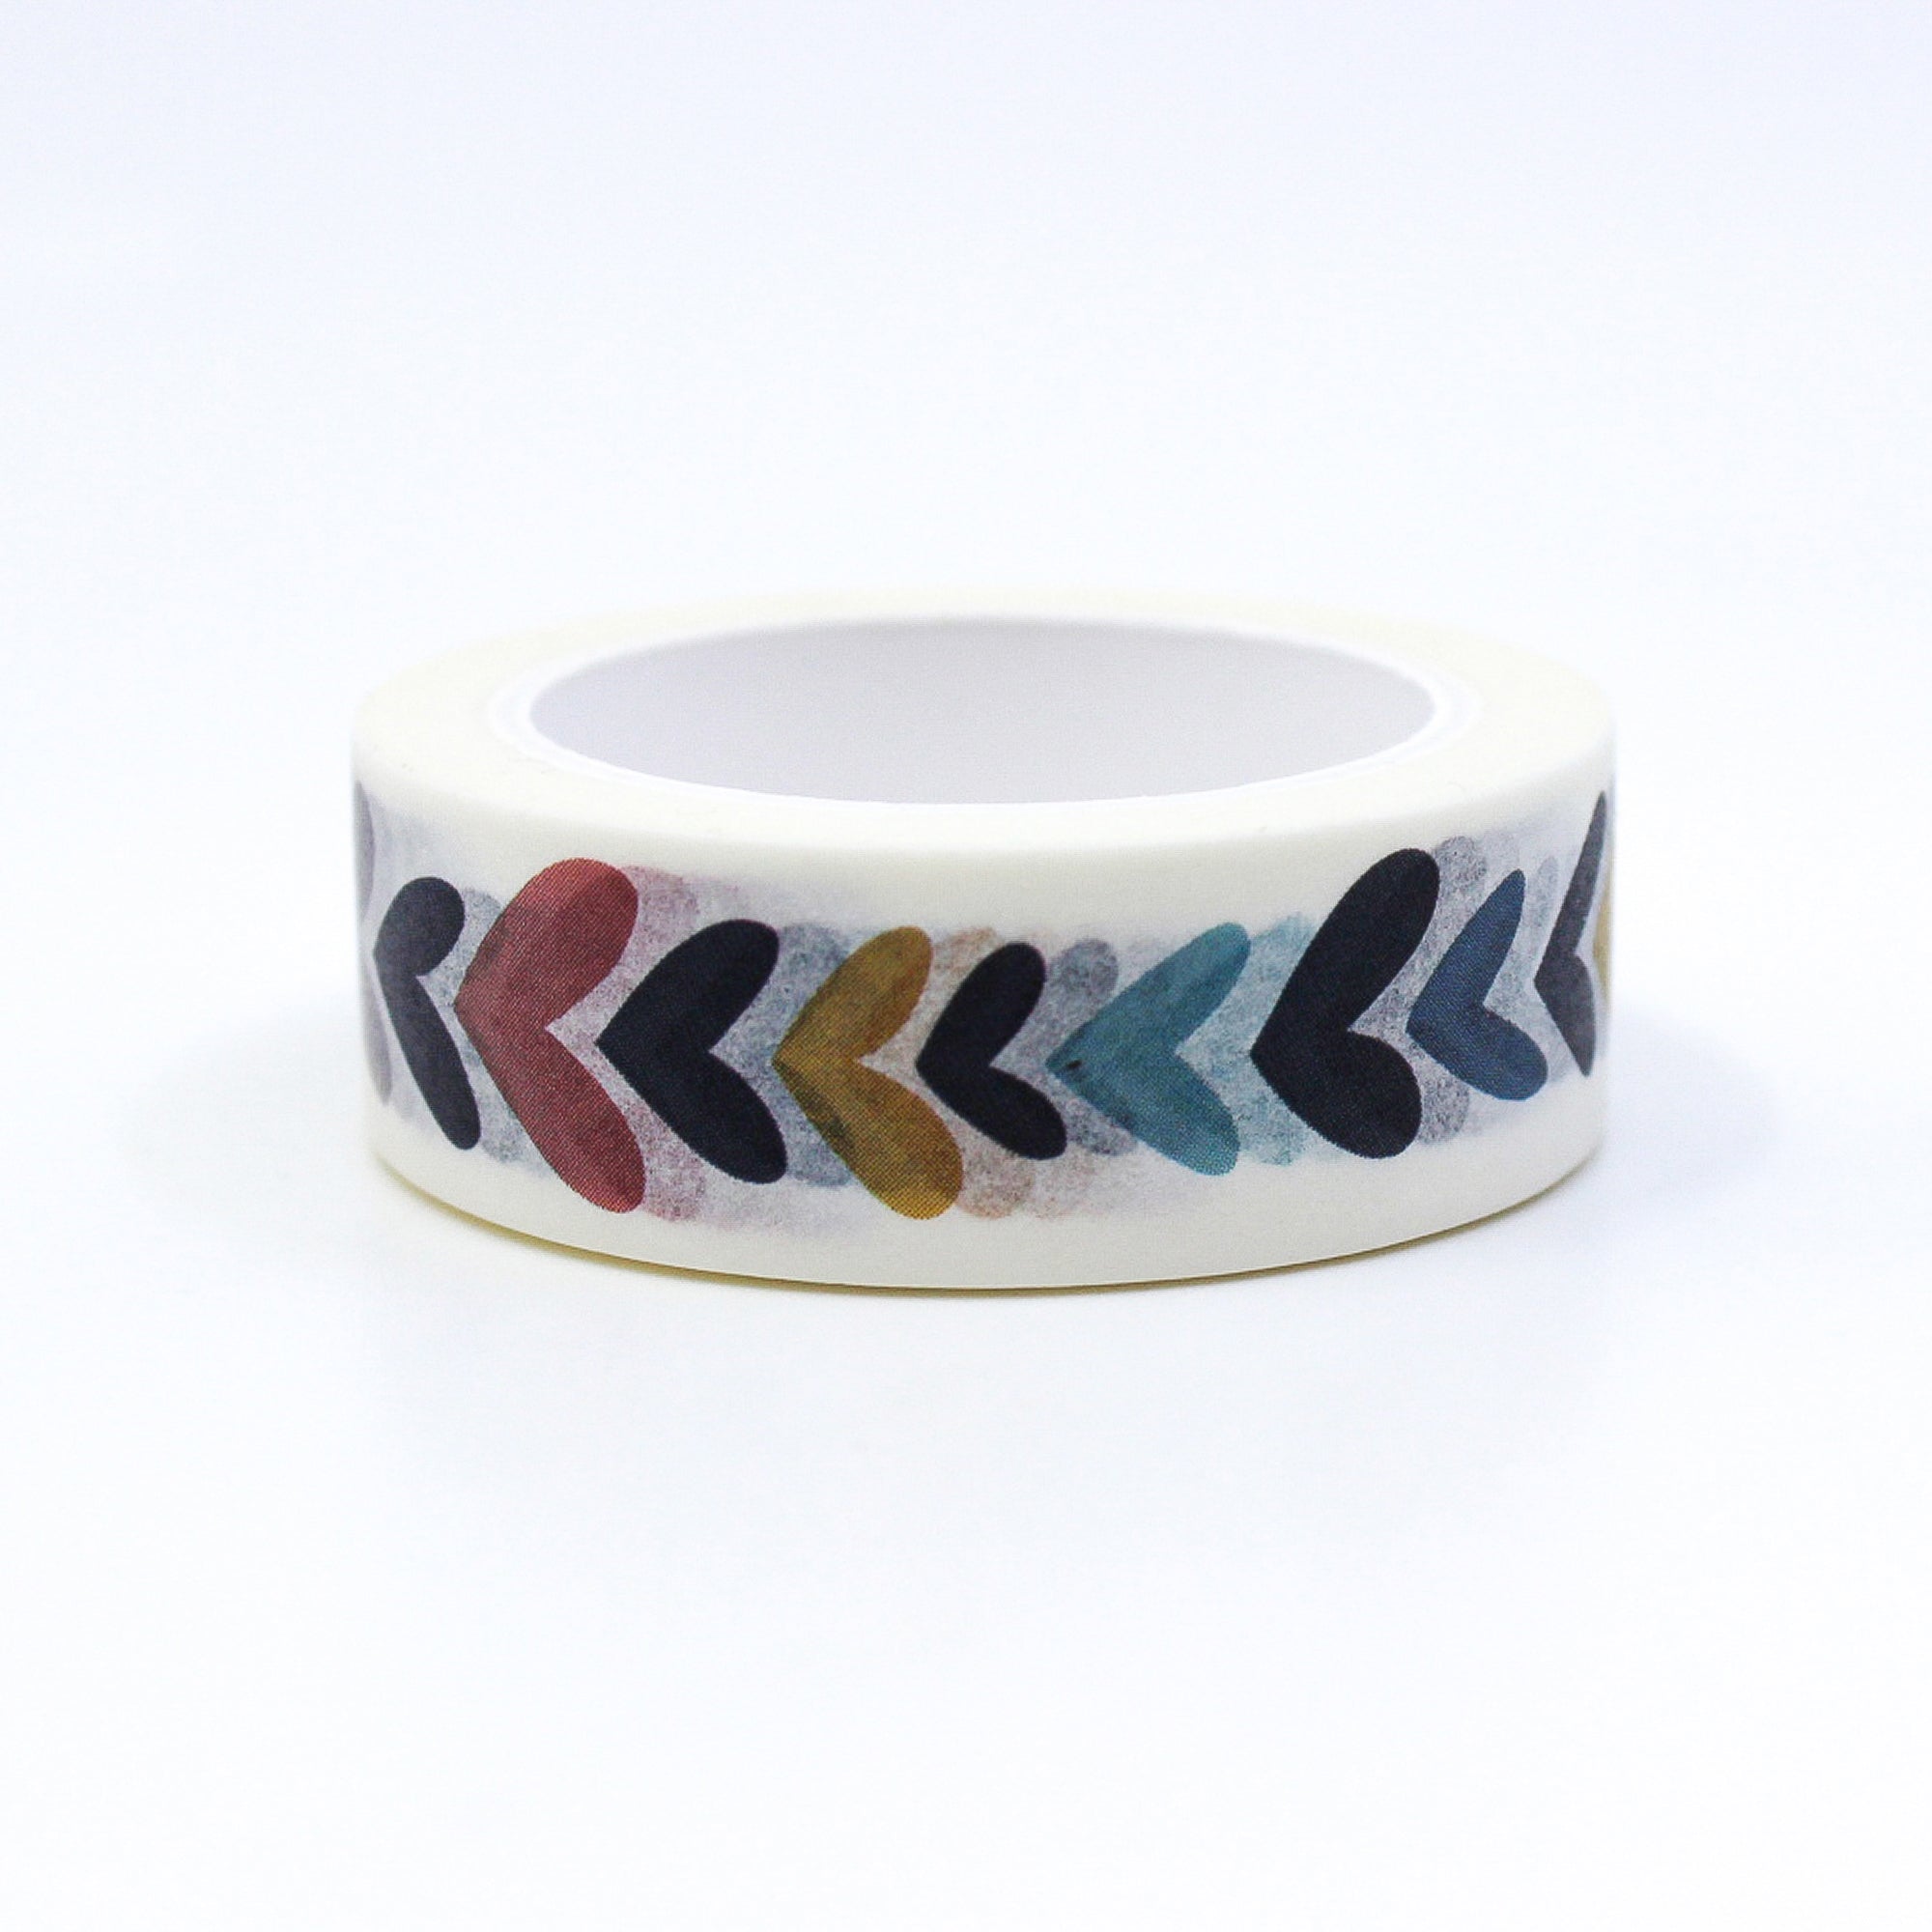 Celebrate love and unity with our Colorful Rainbow Connected Hearts Heartwood Washi Tape, featuring a vibrant and heartwarming design. Ideal for adding a touch of love and togetherness to your projects. This tape is from Maylay Co. and sold at BBB Supplies Craft Shop.